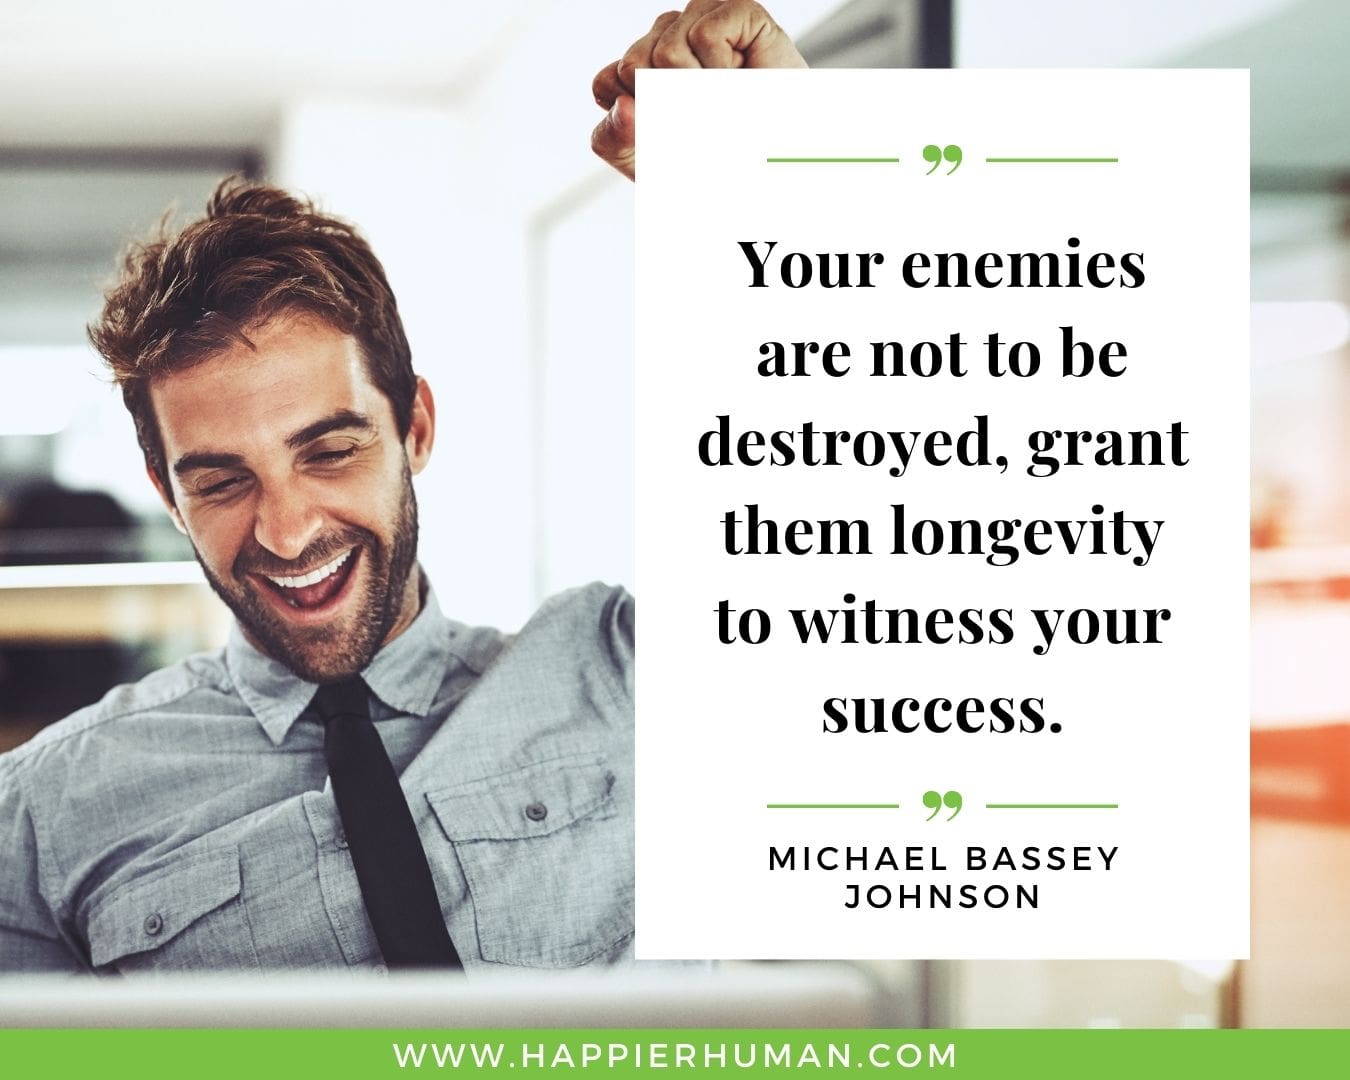 Haters Quotes - “Your enemies are not to be destroyed, grant them longevity to witness your success.“ - Michael Bassey Johnson